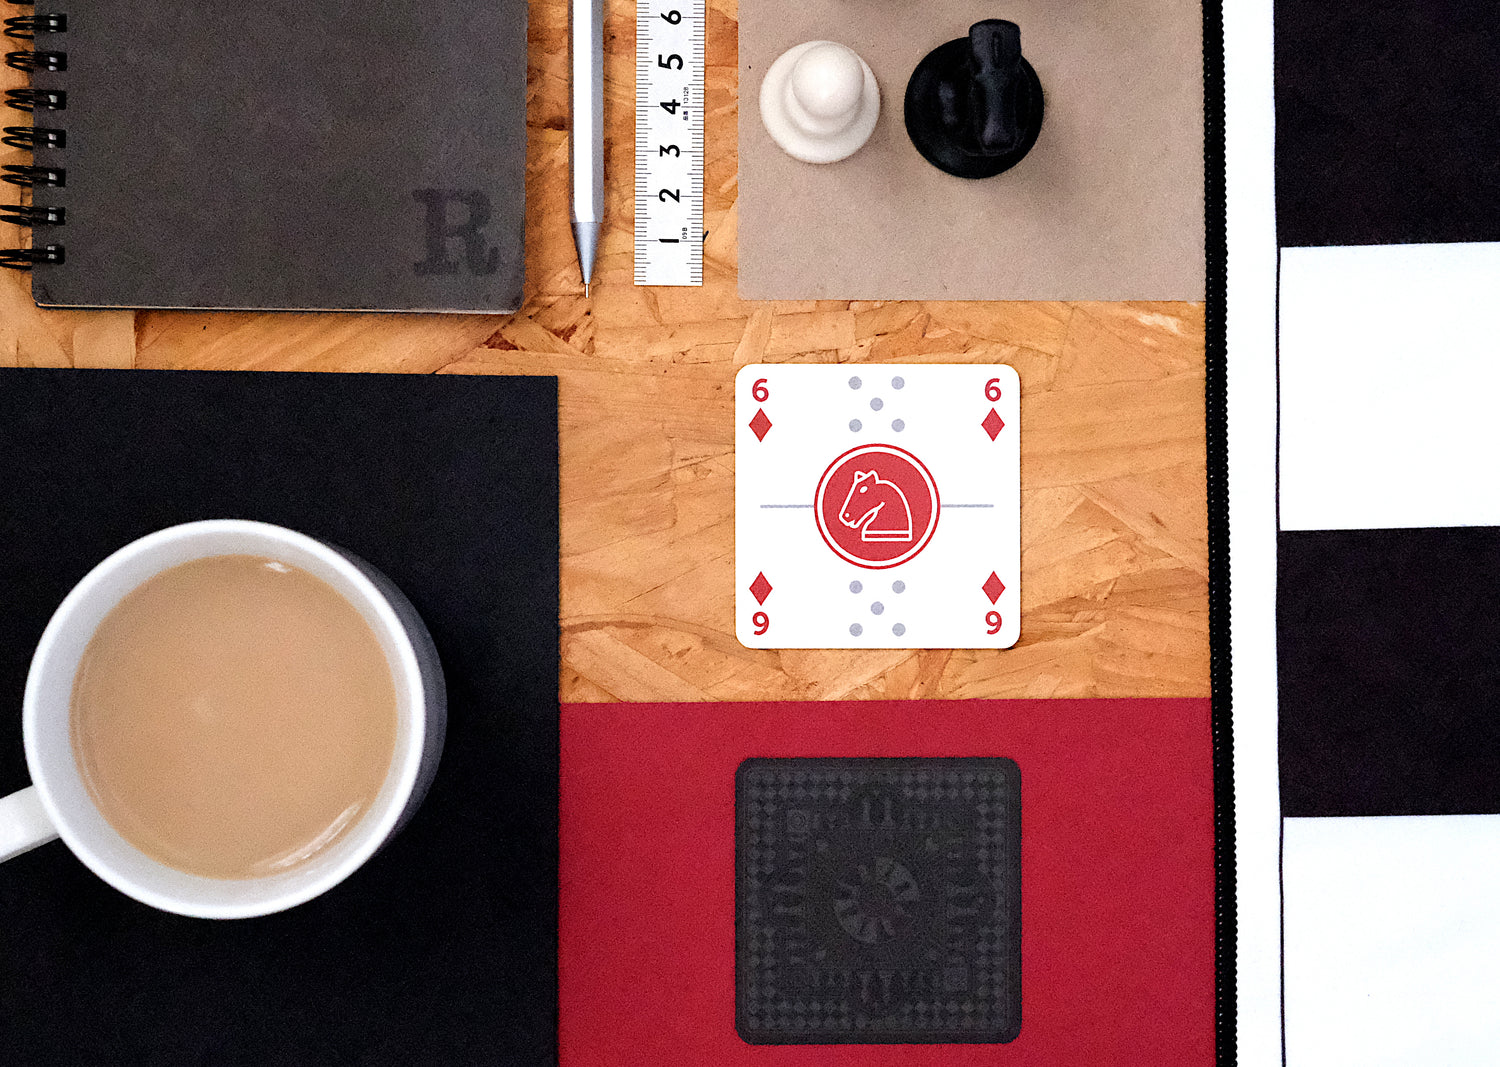 6 hearts, red knight and dominoes card on a table with cup of tea and other objects